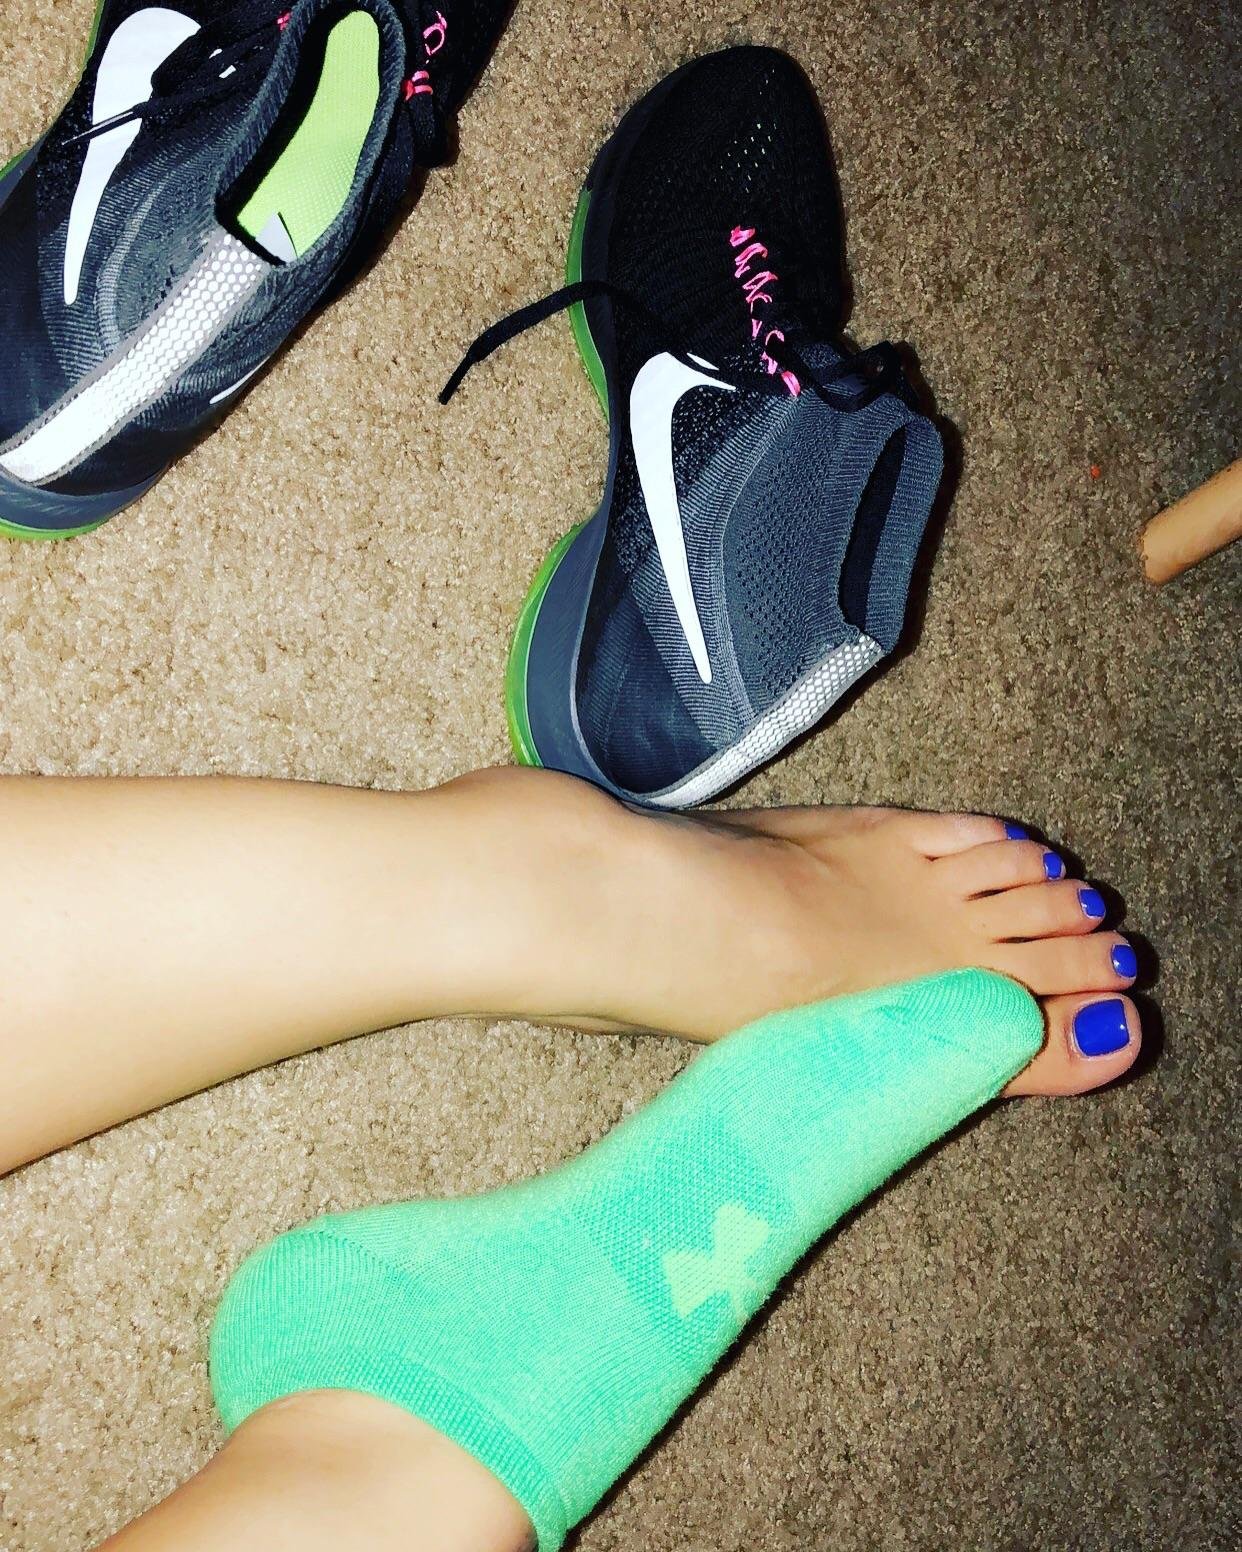 These pretty feet love to workout